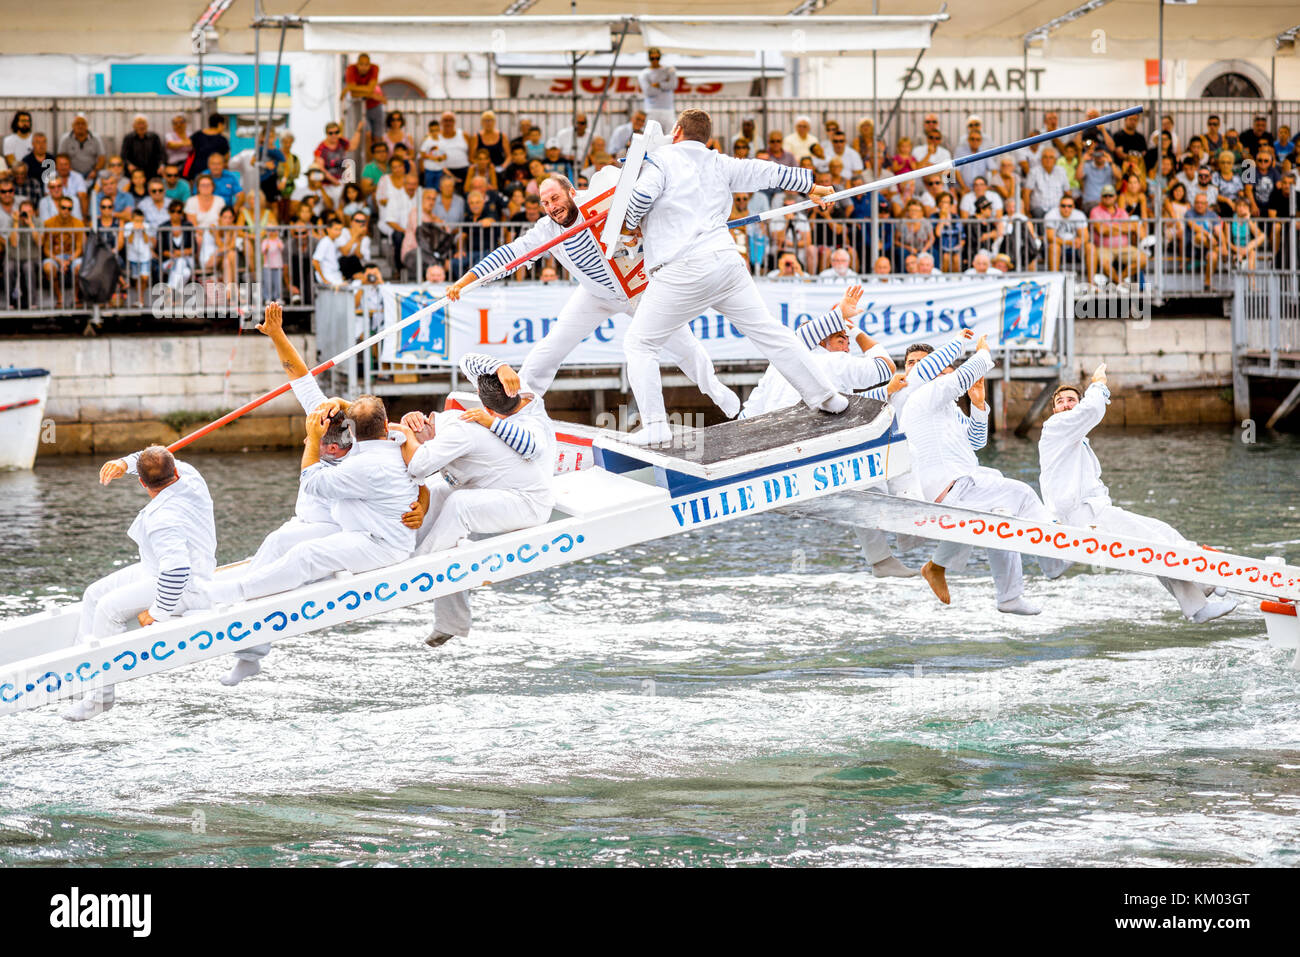 Water jousting in Sete town Stock Photo - Alamy